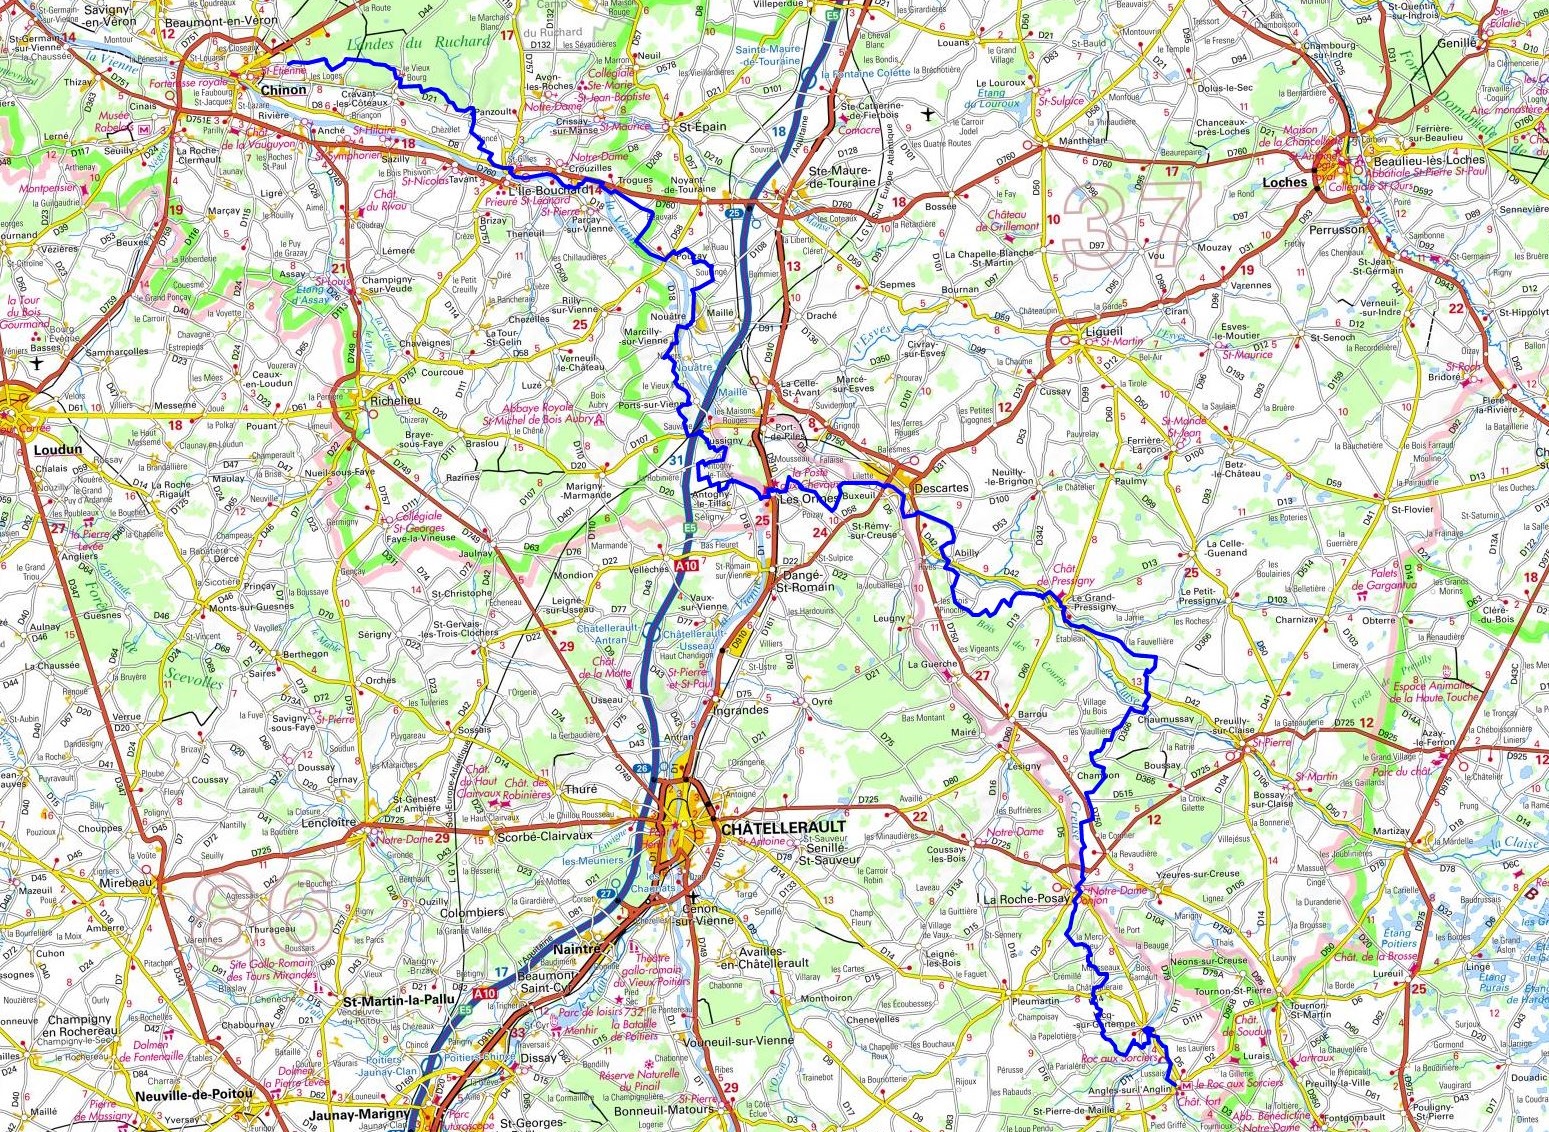 GR48 Hilking from Angles-sur-l'Anglin (Vienne) to Chinon (Indre-et-Loire) 1